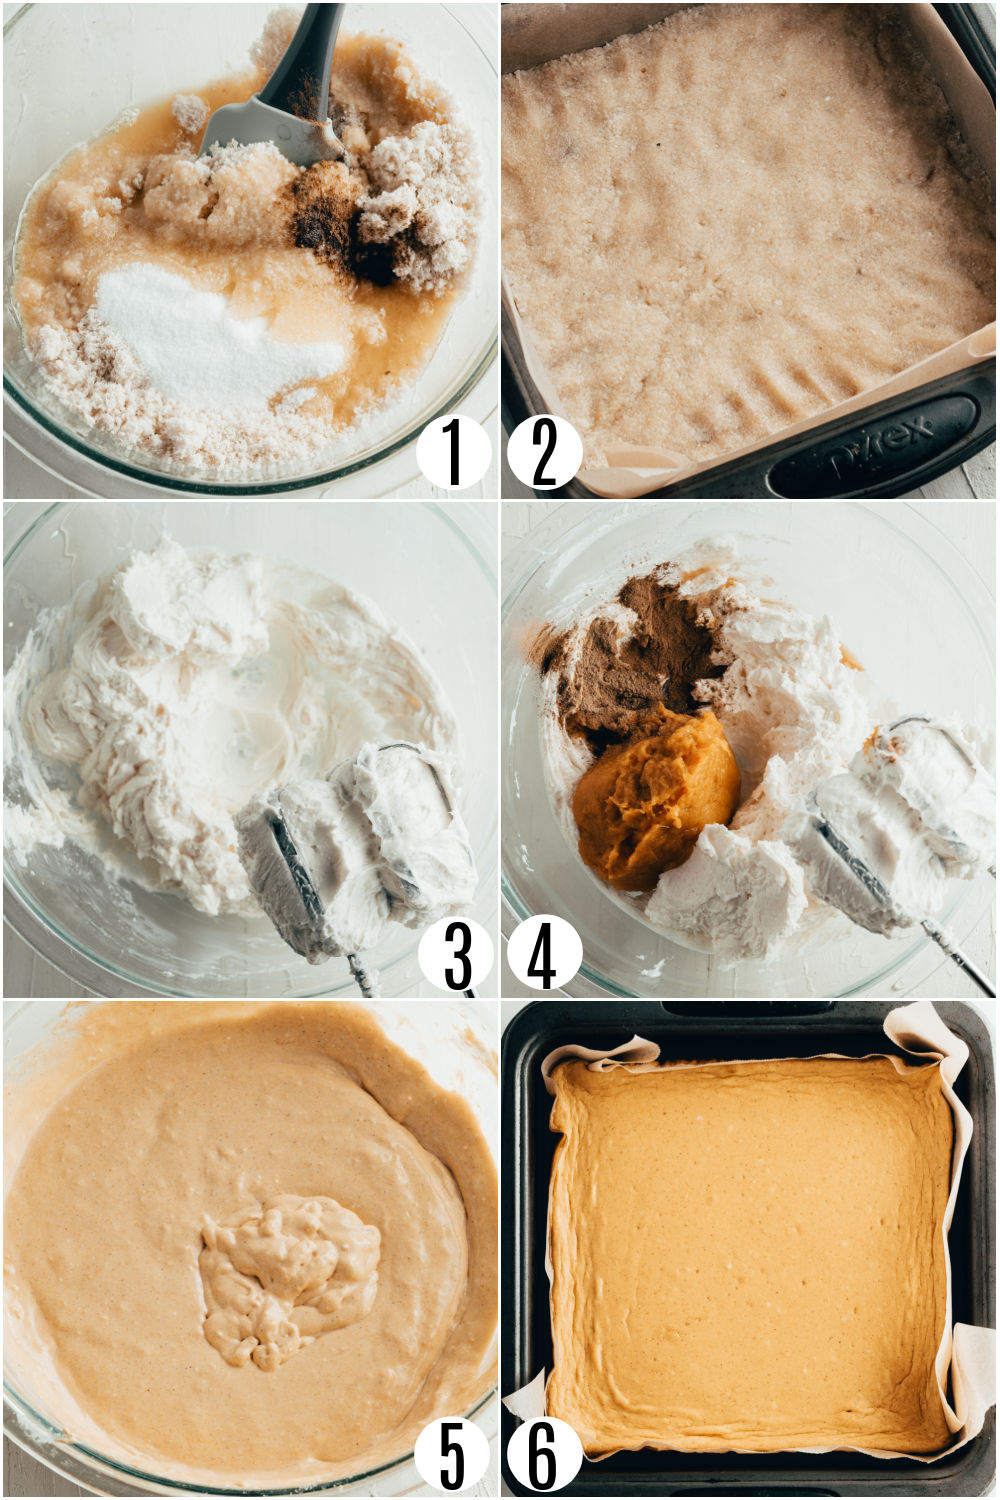 Step by step photos showing how to make keto pumpkin cheesecake.